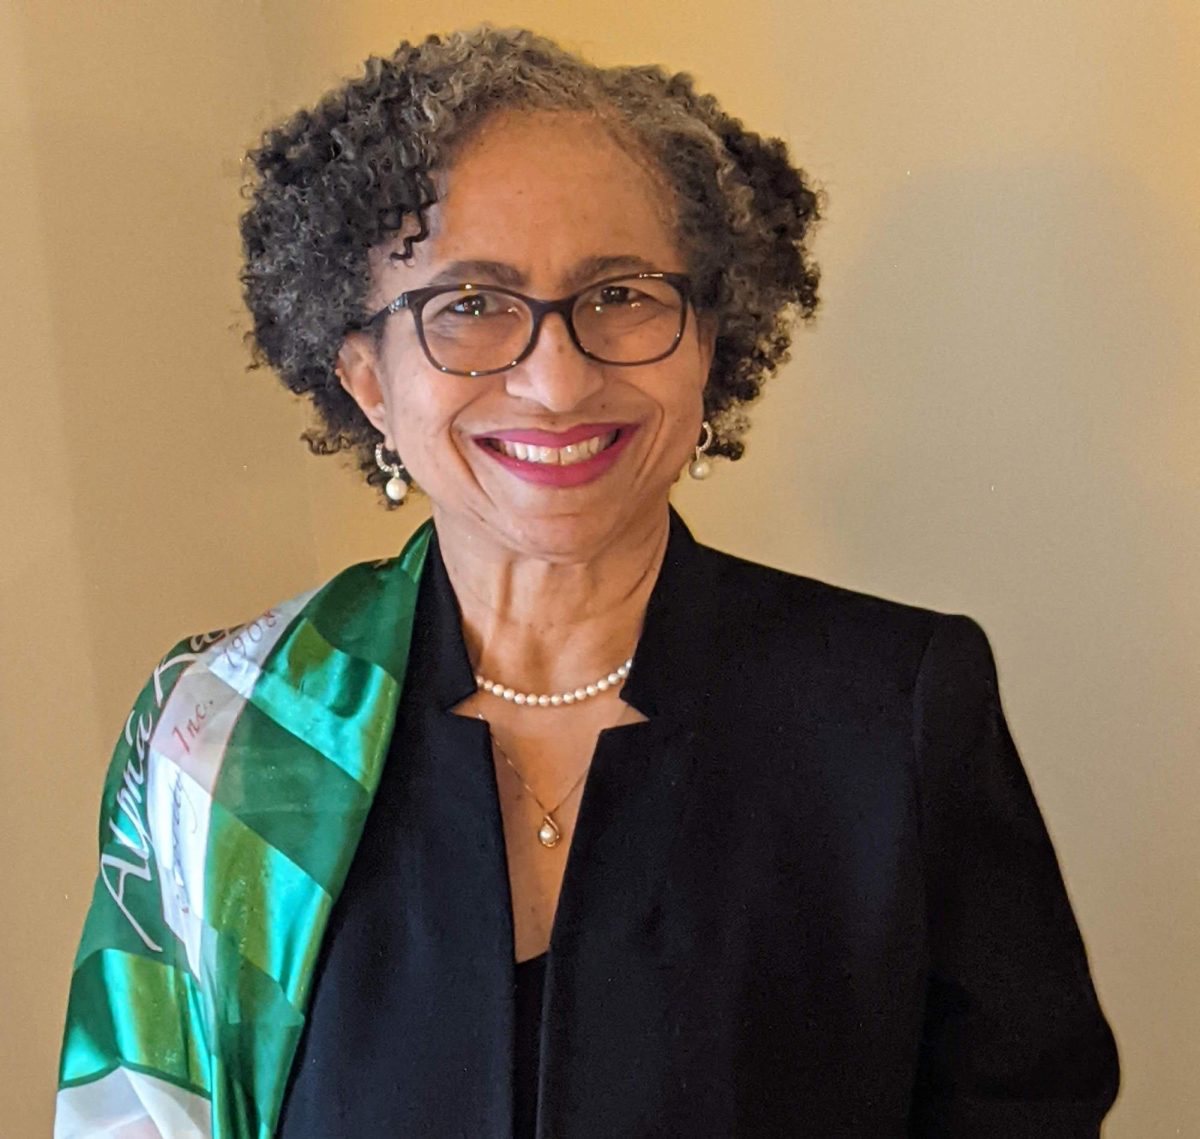 Pamela+Hopson%2C+executive+director+of+Multicultural+Center%2C+has+been+on+campus+for+45+years+and+is+one+of+the+longest+standing+faculty+members+on+campus.